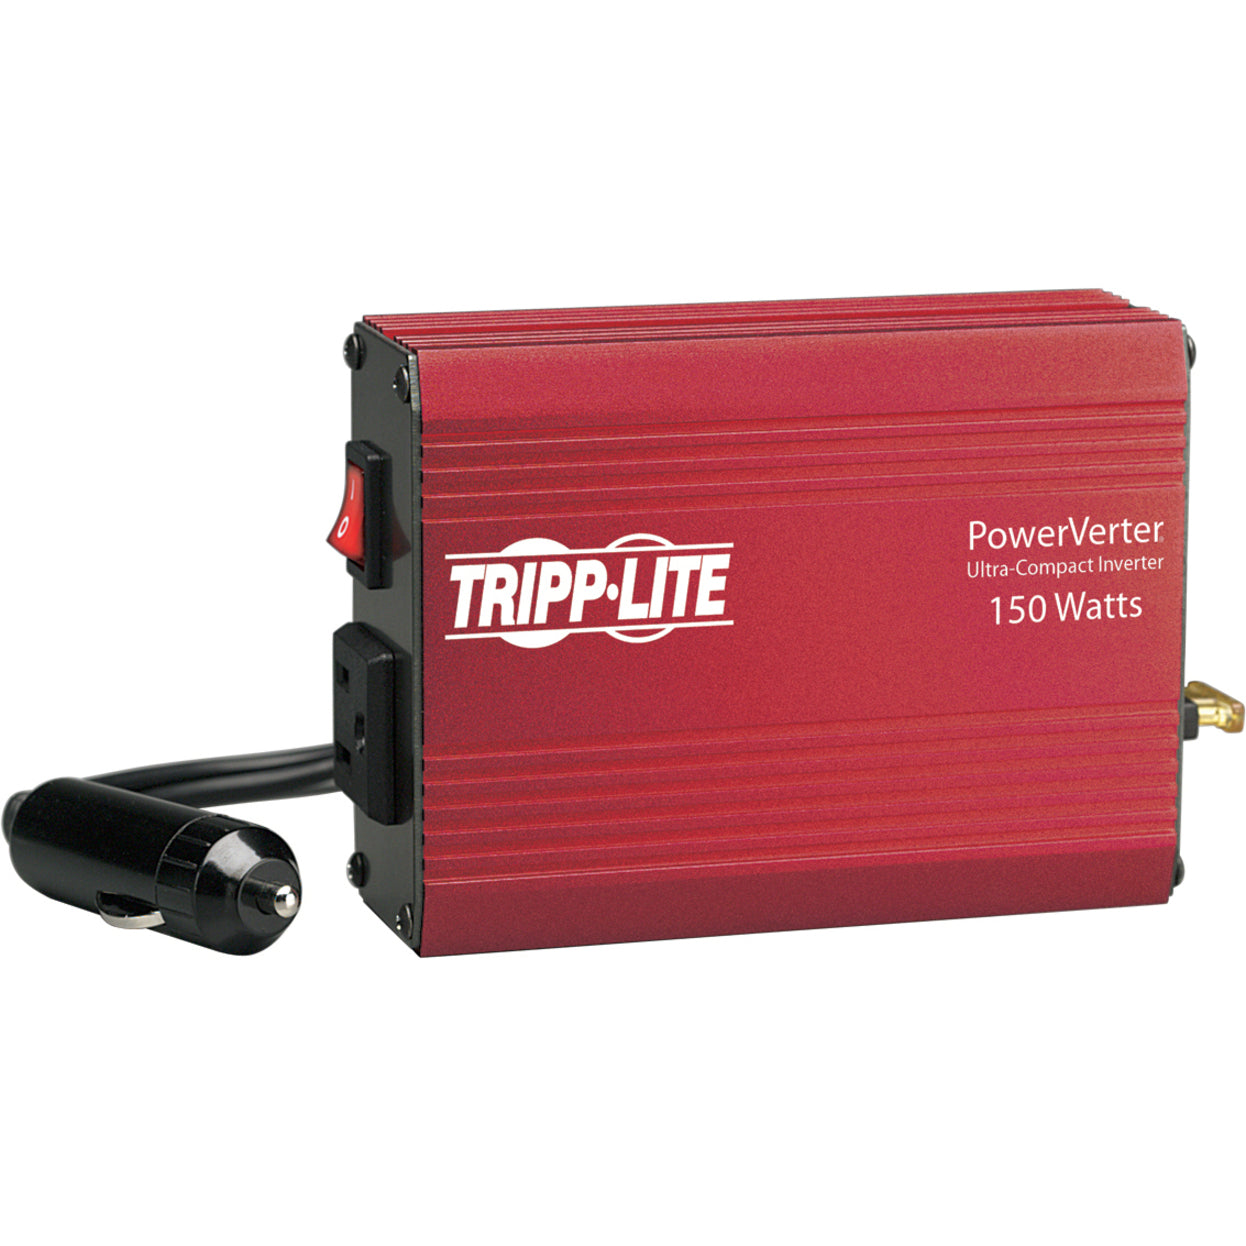 Tripp Lite PV150 PowerVerter 150-Watt Ultra-Compact Inverter, 1 Outlet Auto Adapt with Cig Plug 20A